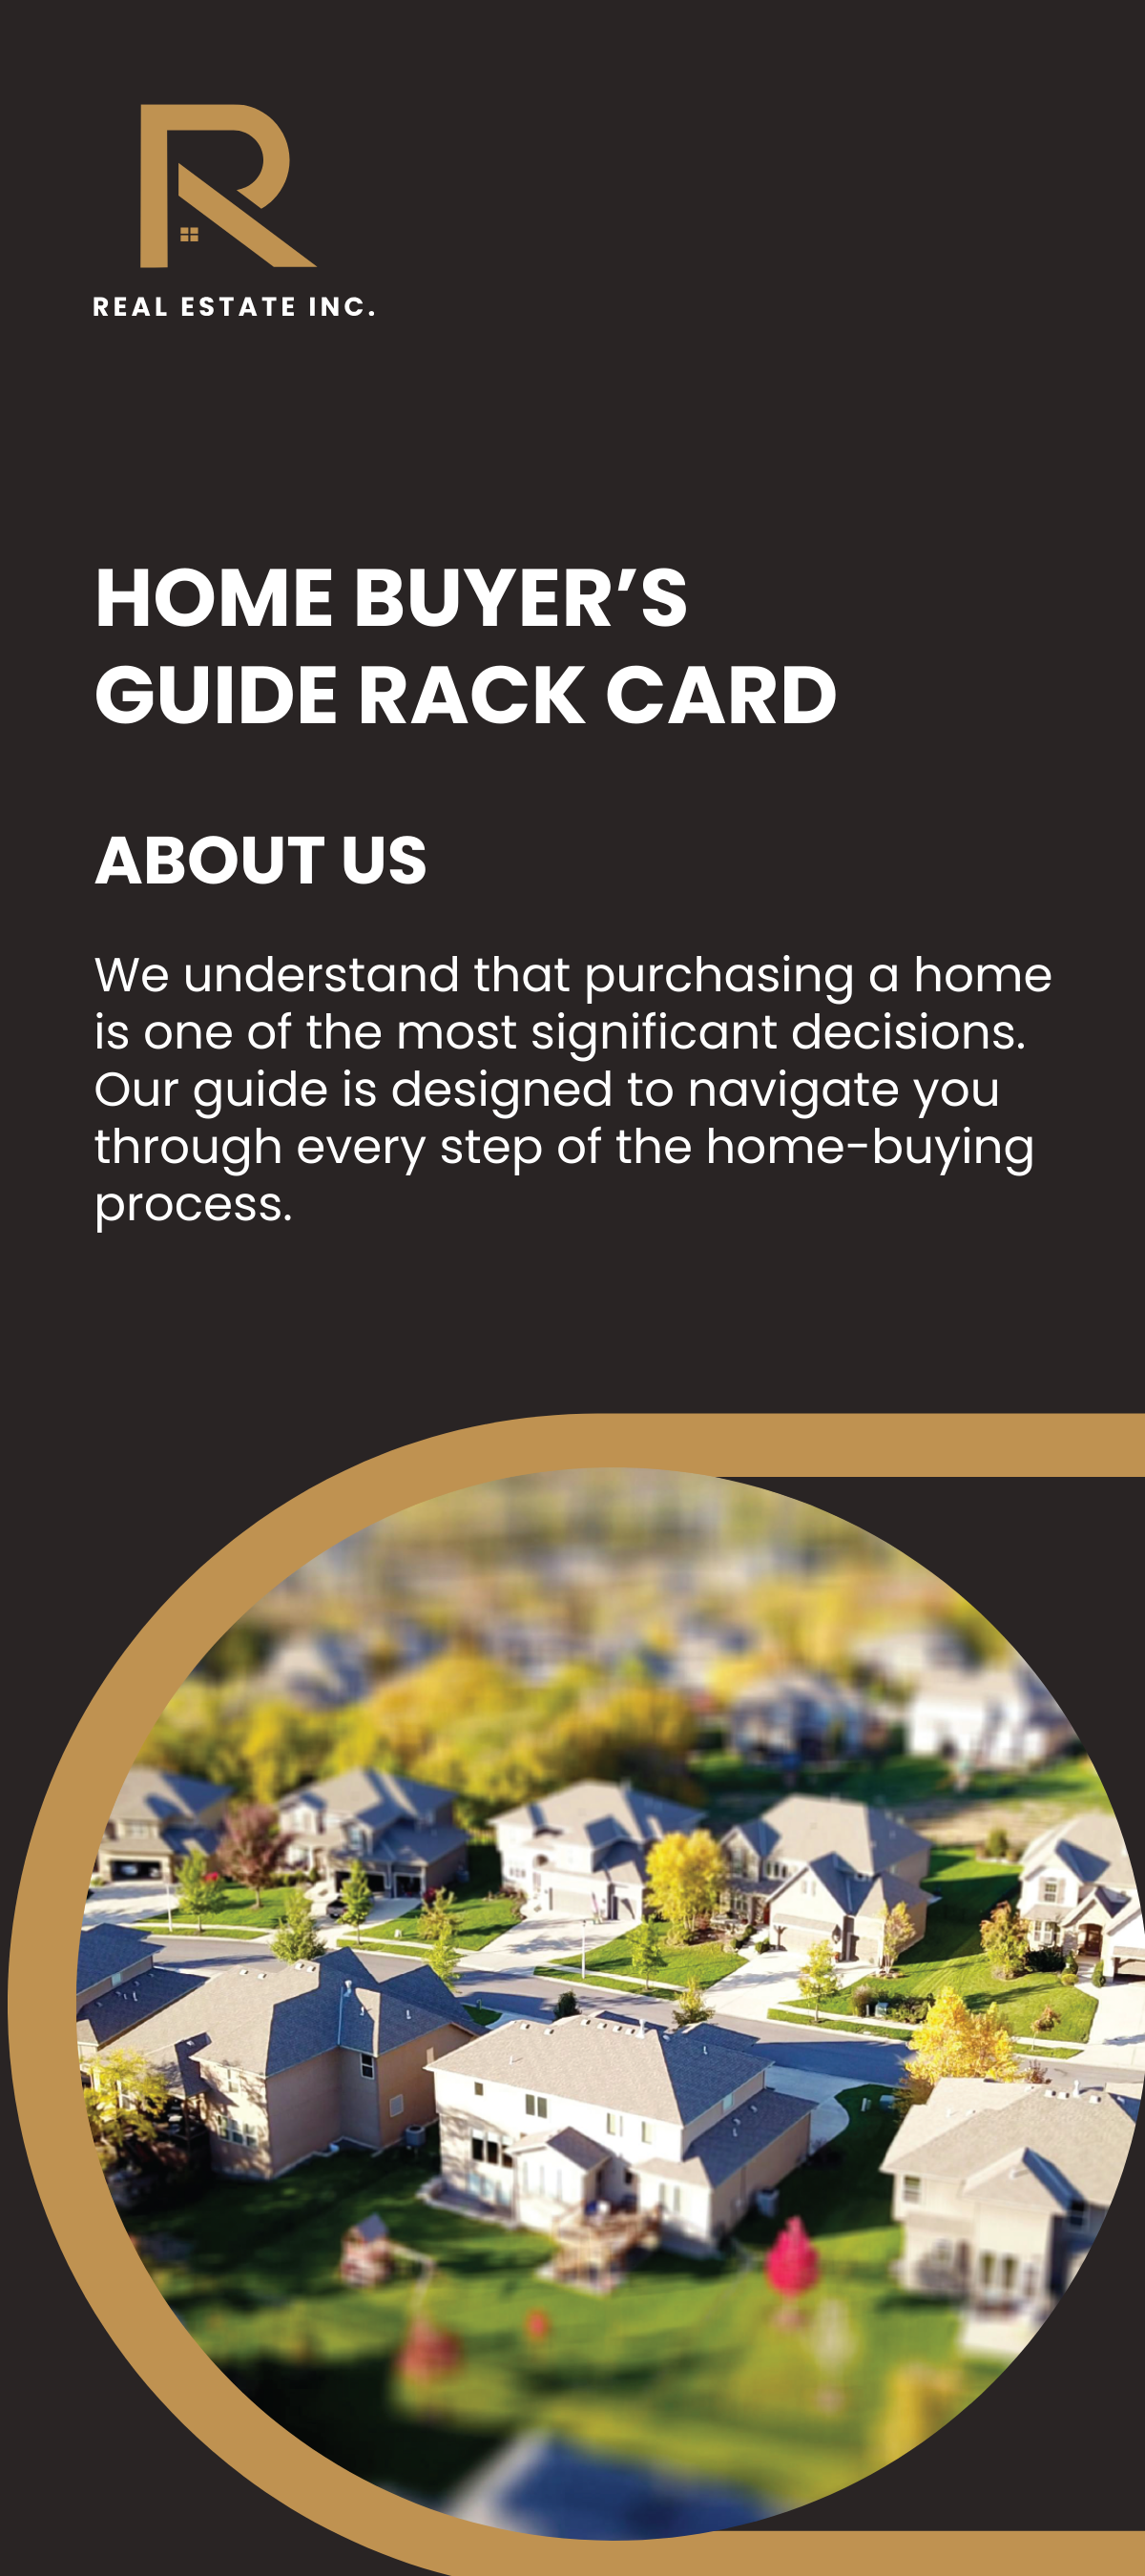 Home Buyer’s Guide Rack Card Template